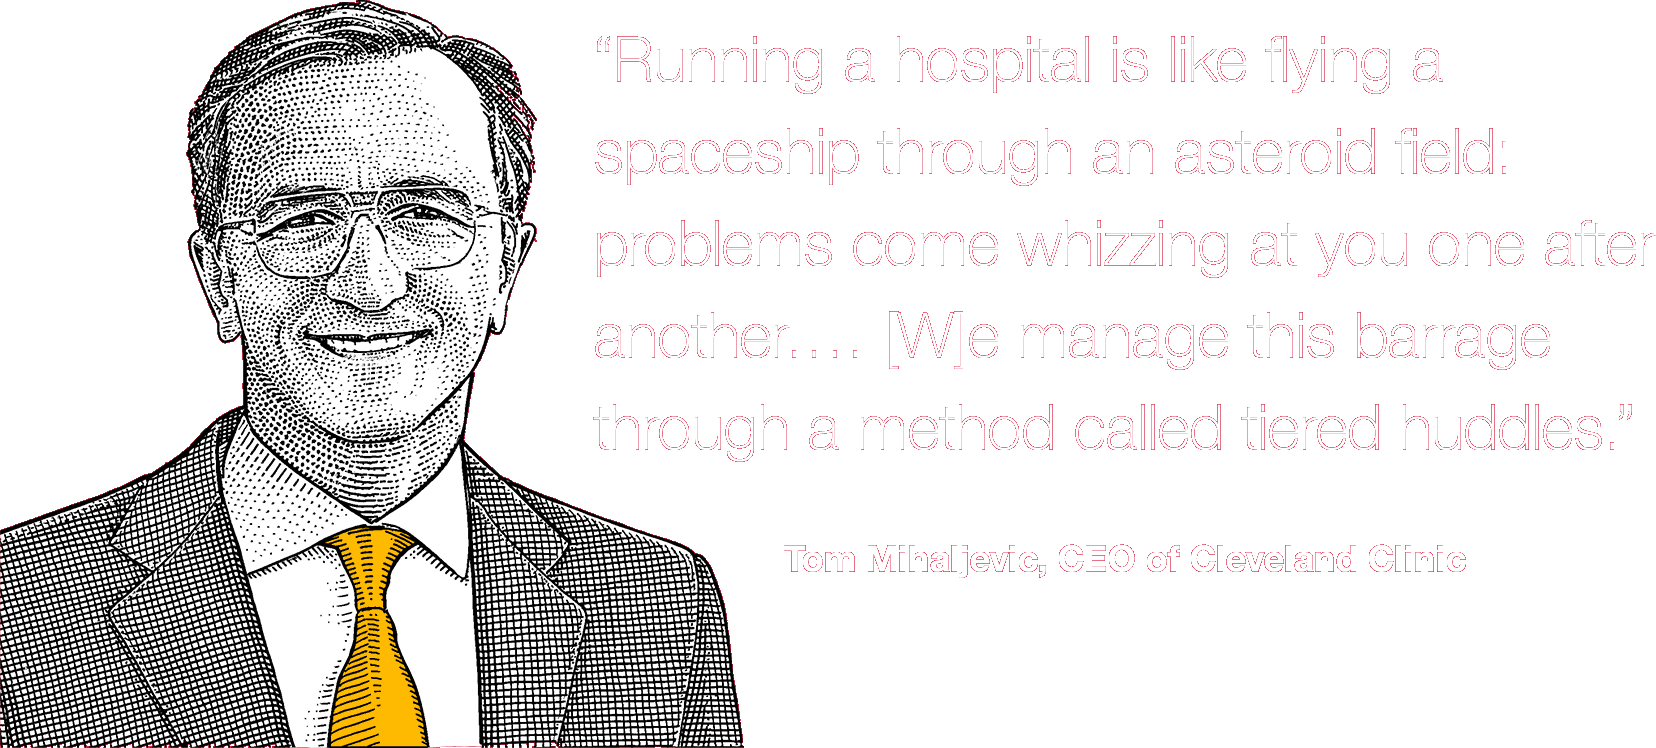 “Running a hospital is like flying a spaceship through an asteroid field: problems come whizzing at you one after another.… [W]e manage this barrage through a method called tiered huddles.” Tom Mihaljevic, CEO of Cleveland Clinic